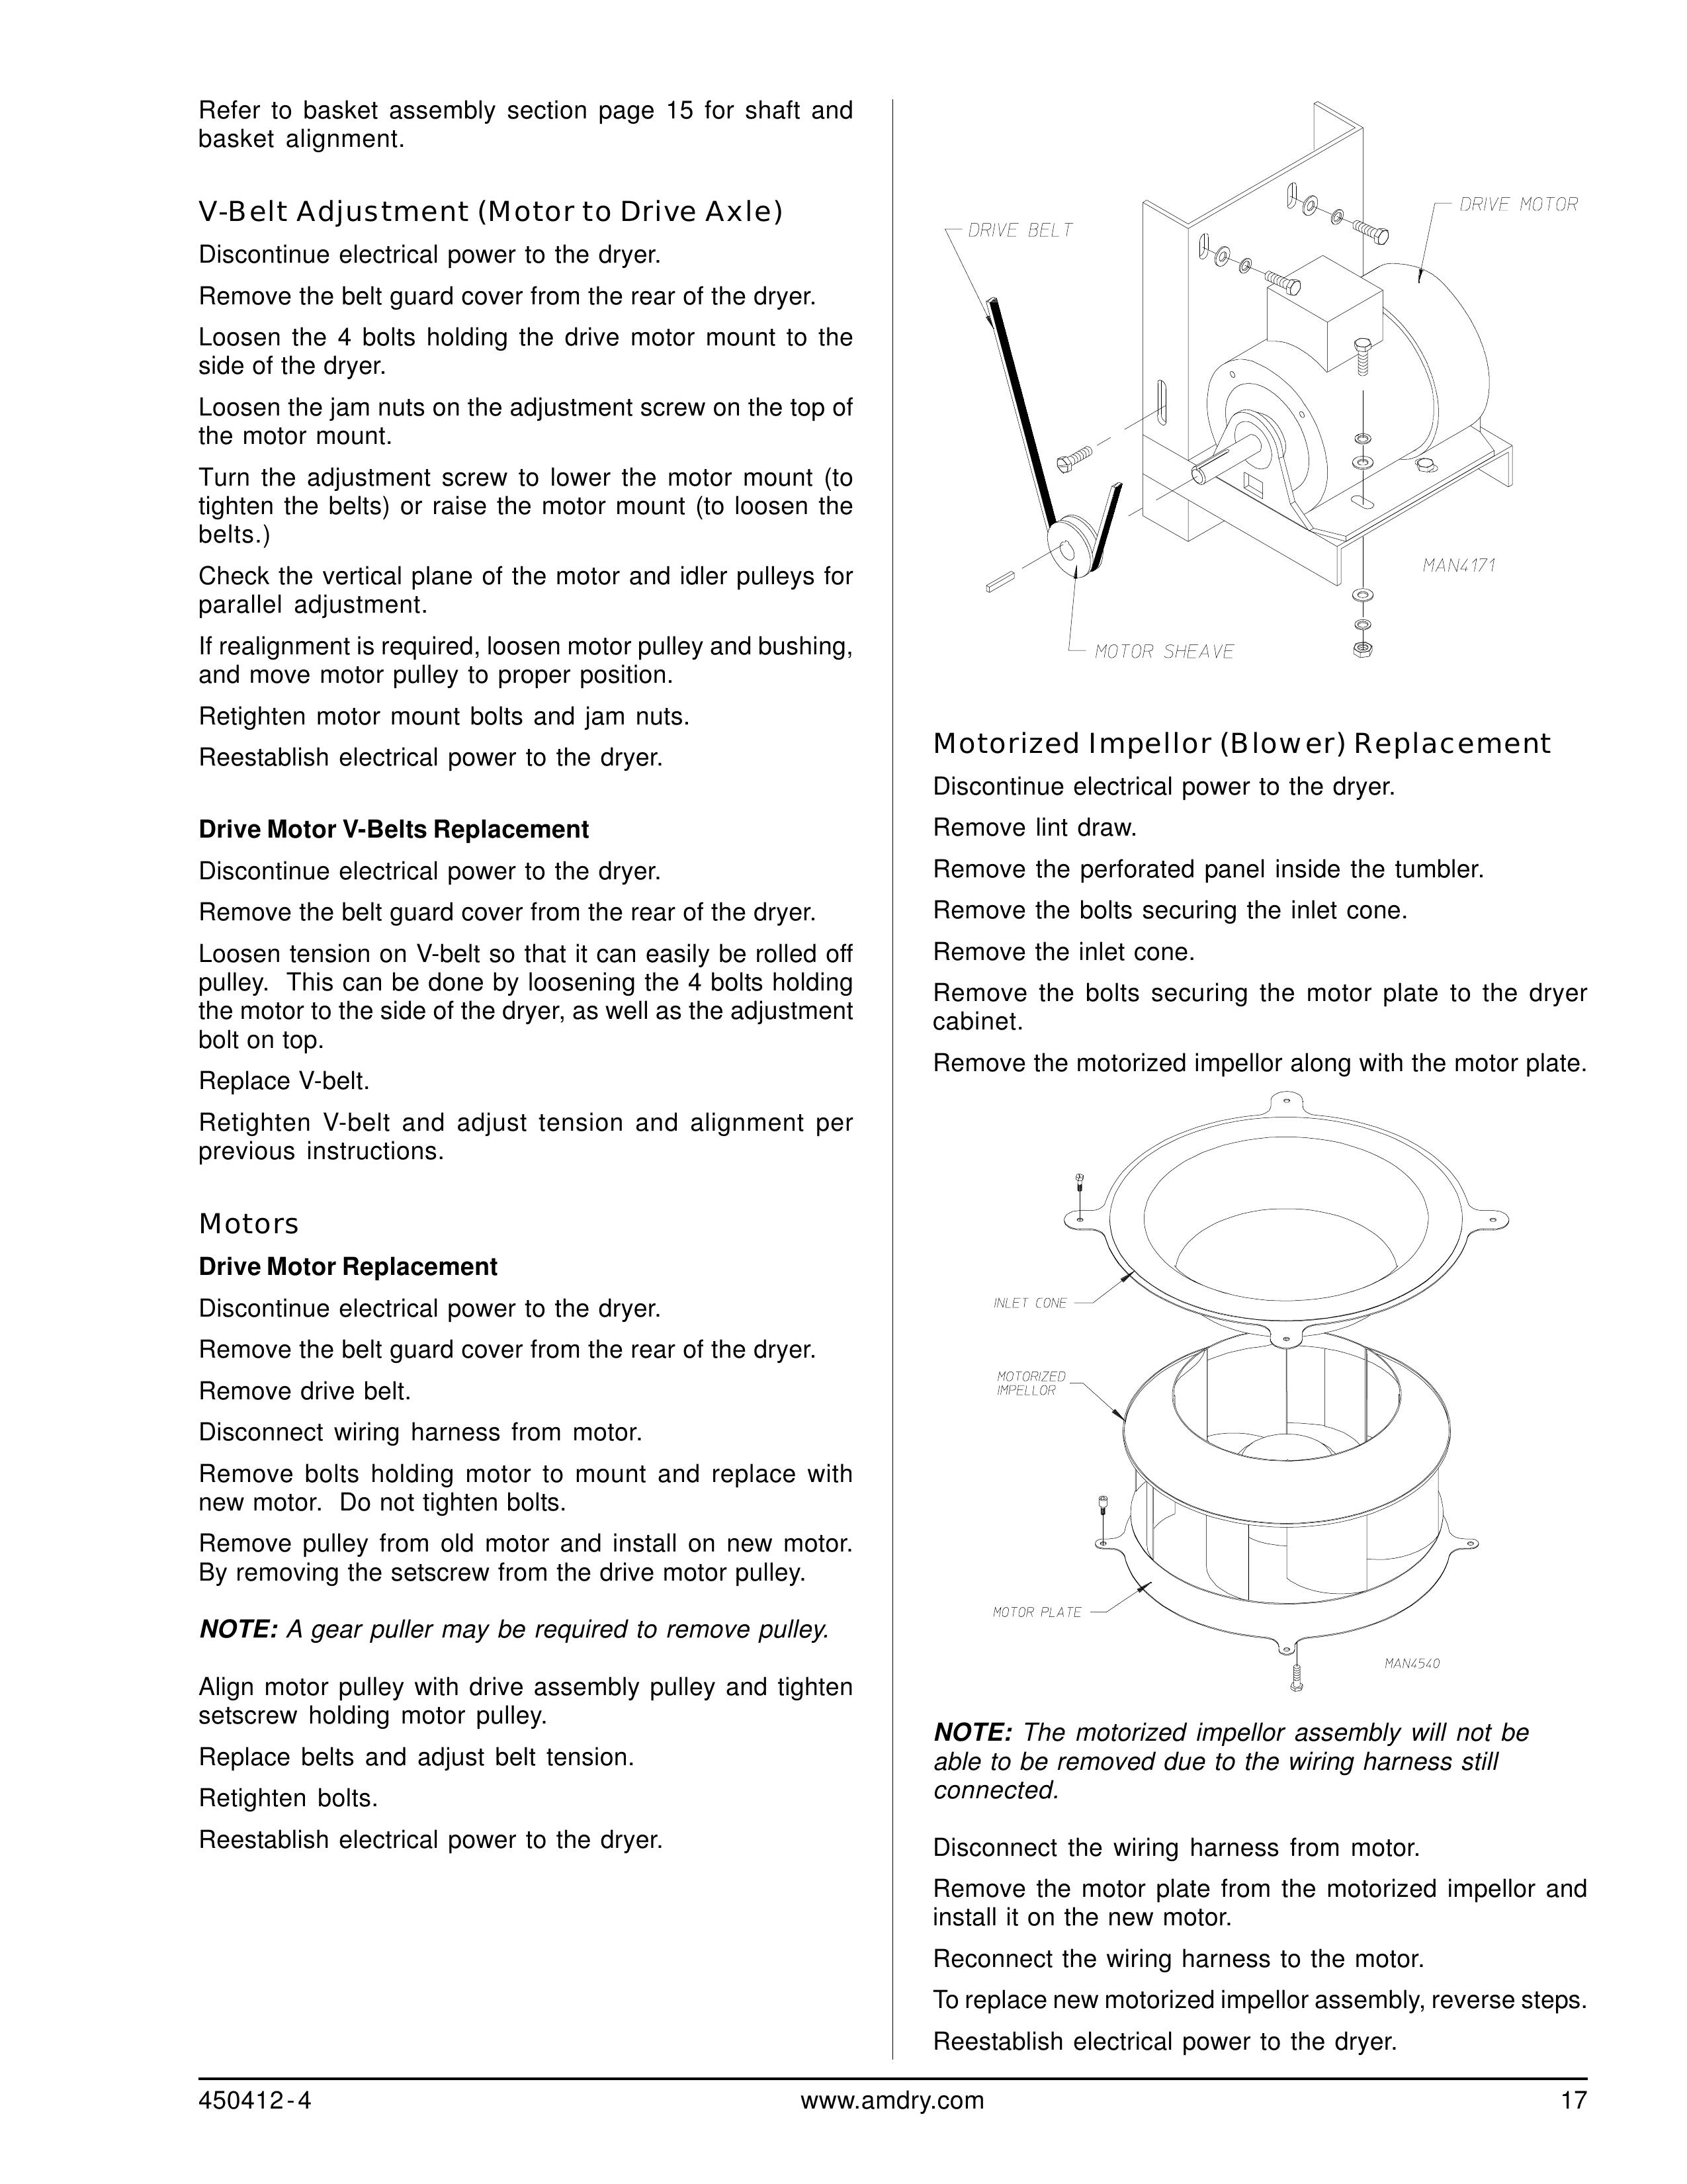 ADC ML-122 Clothes Dryer User Manual (Page 17)